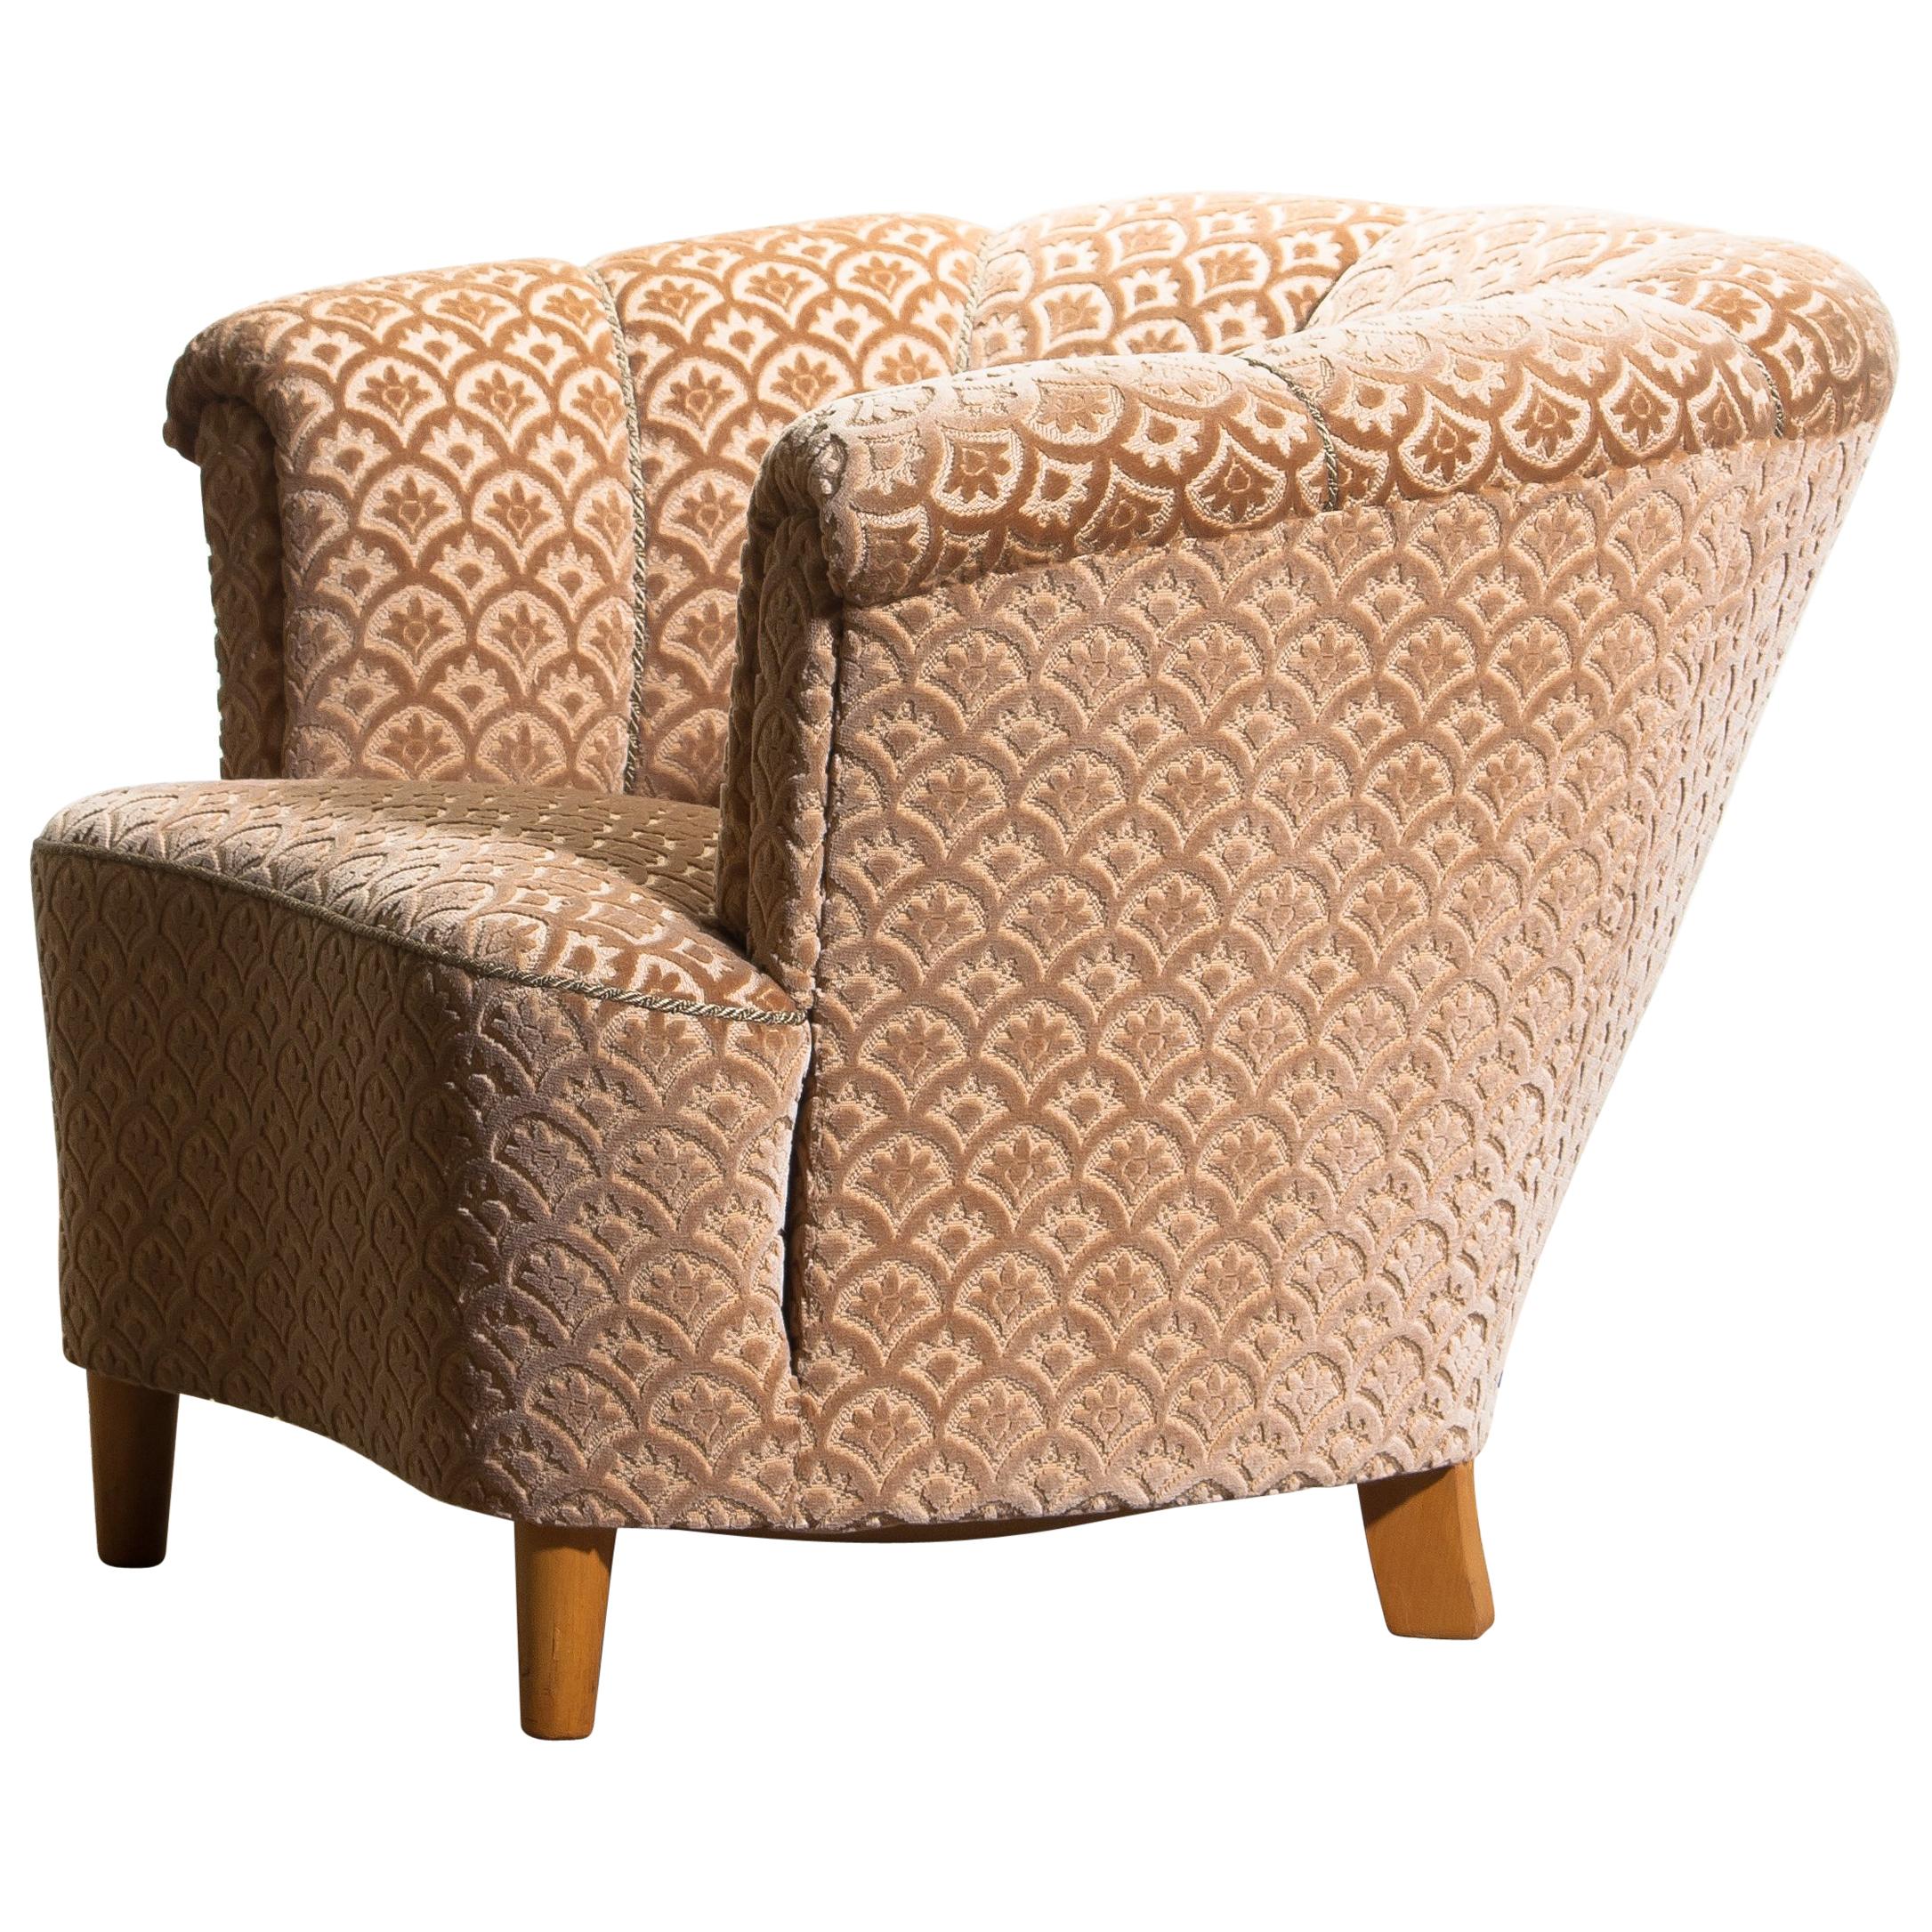 Swedish 1940s, Velvet Jacquard Club Lounge Cocktail Chair from Sweden 1